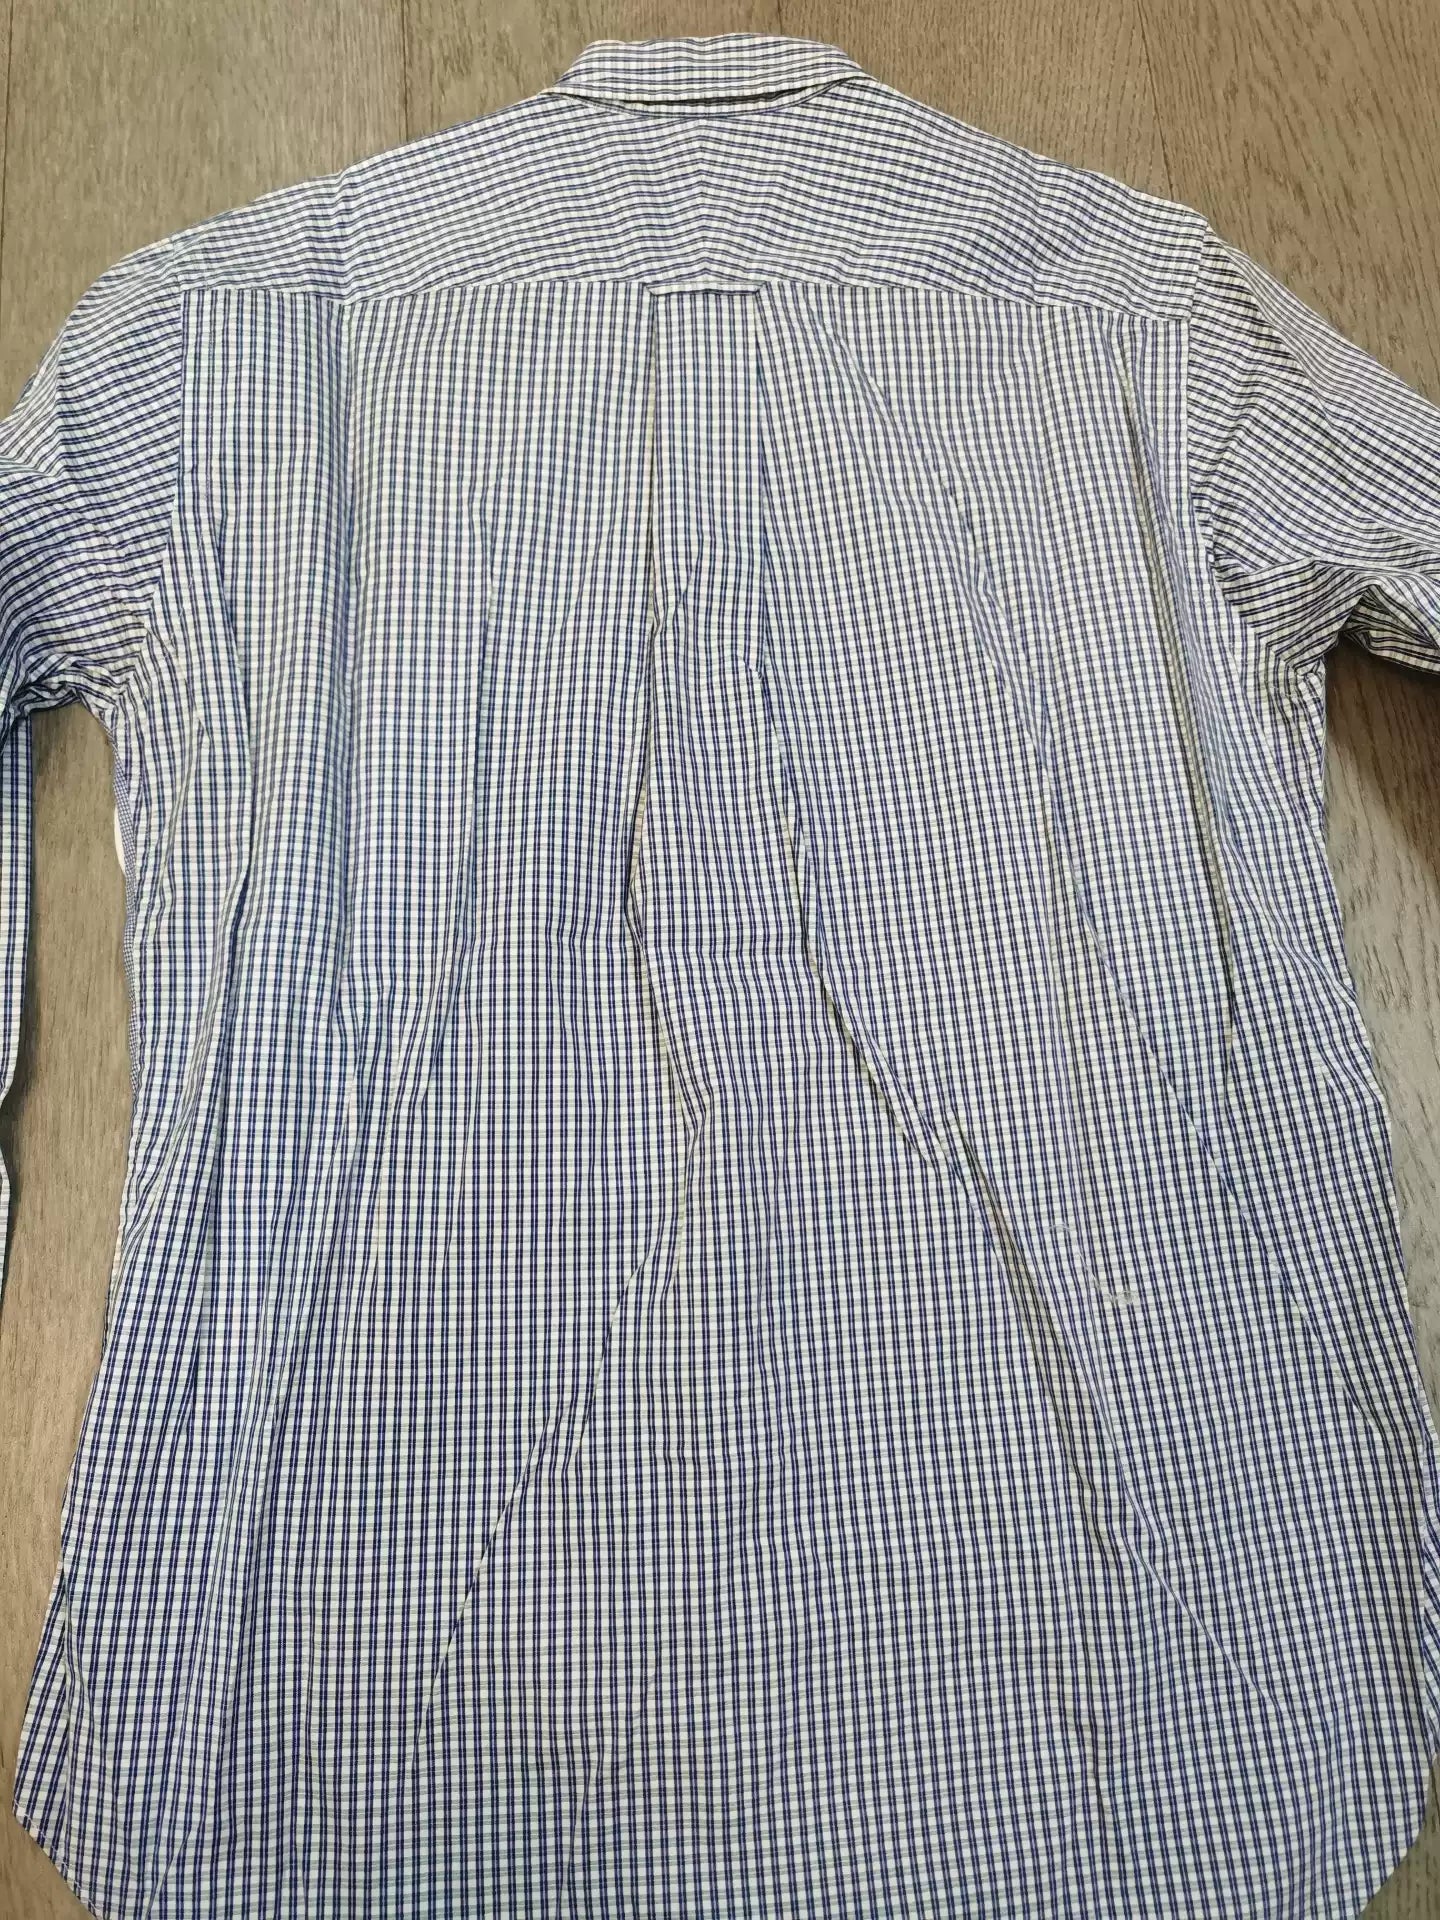 Comme des garcons HOMME striped printed shirt with hundreds of cloth circles.